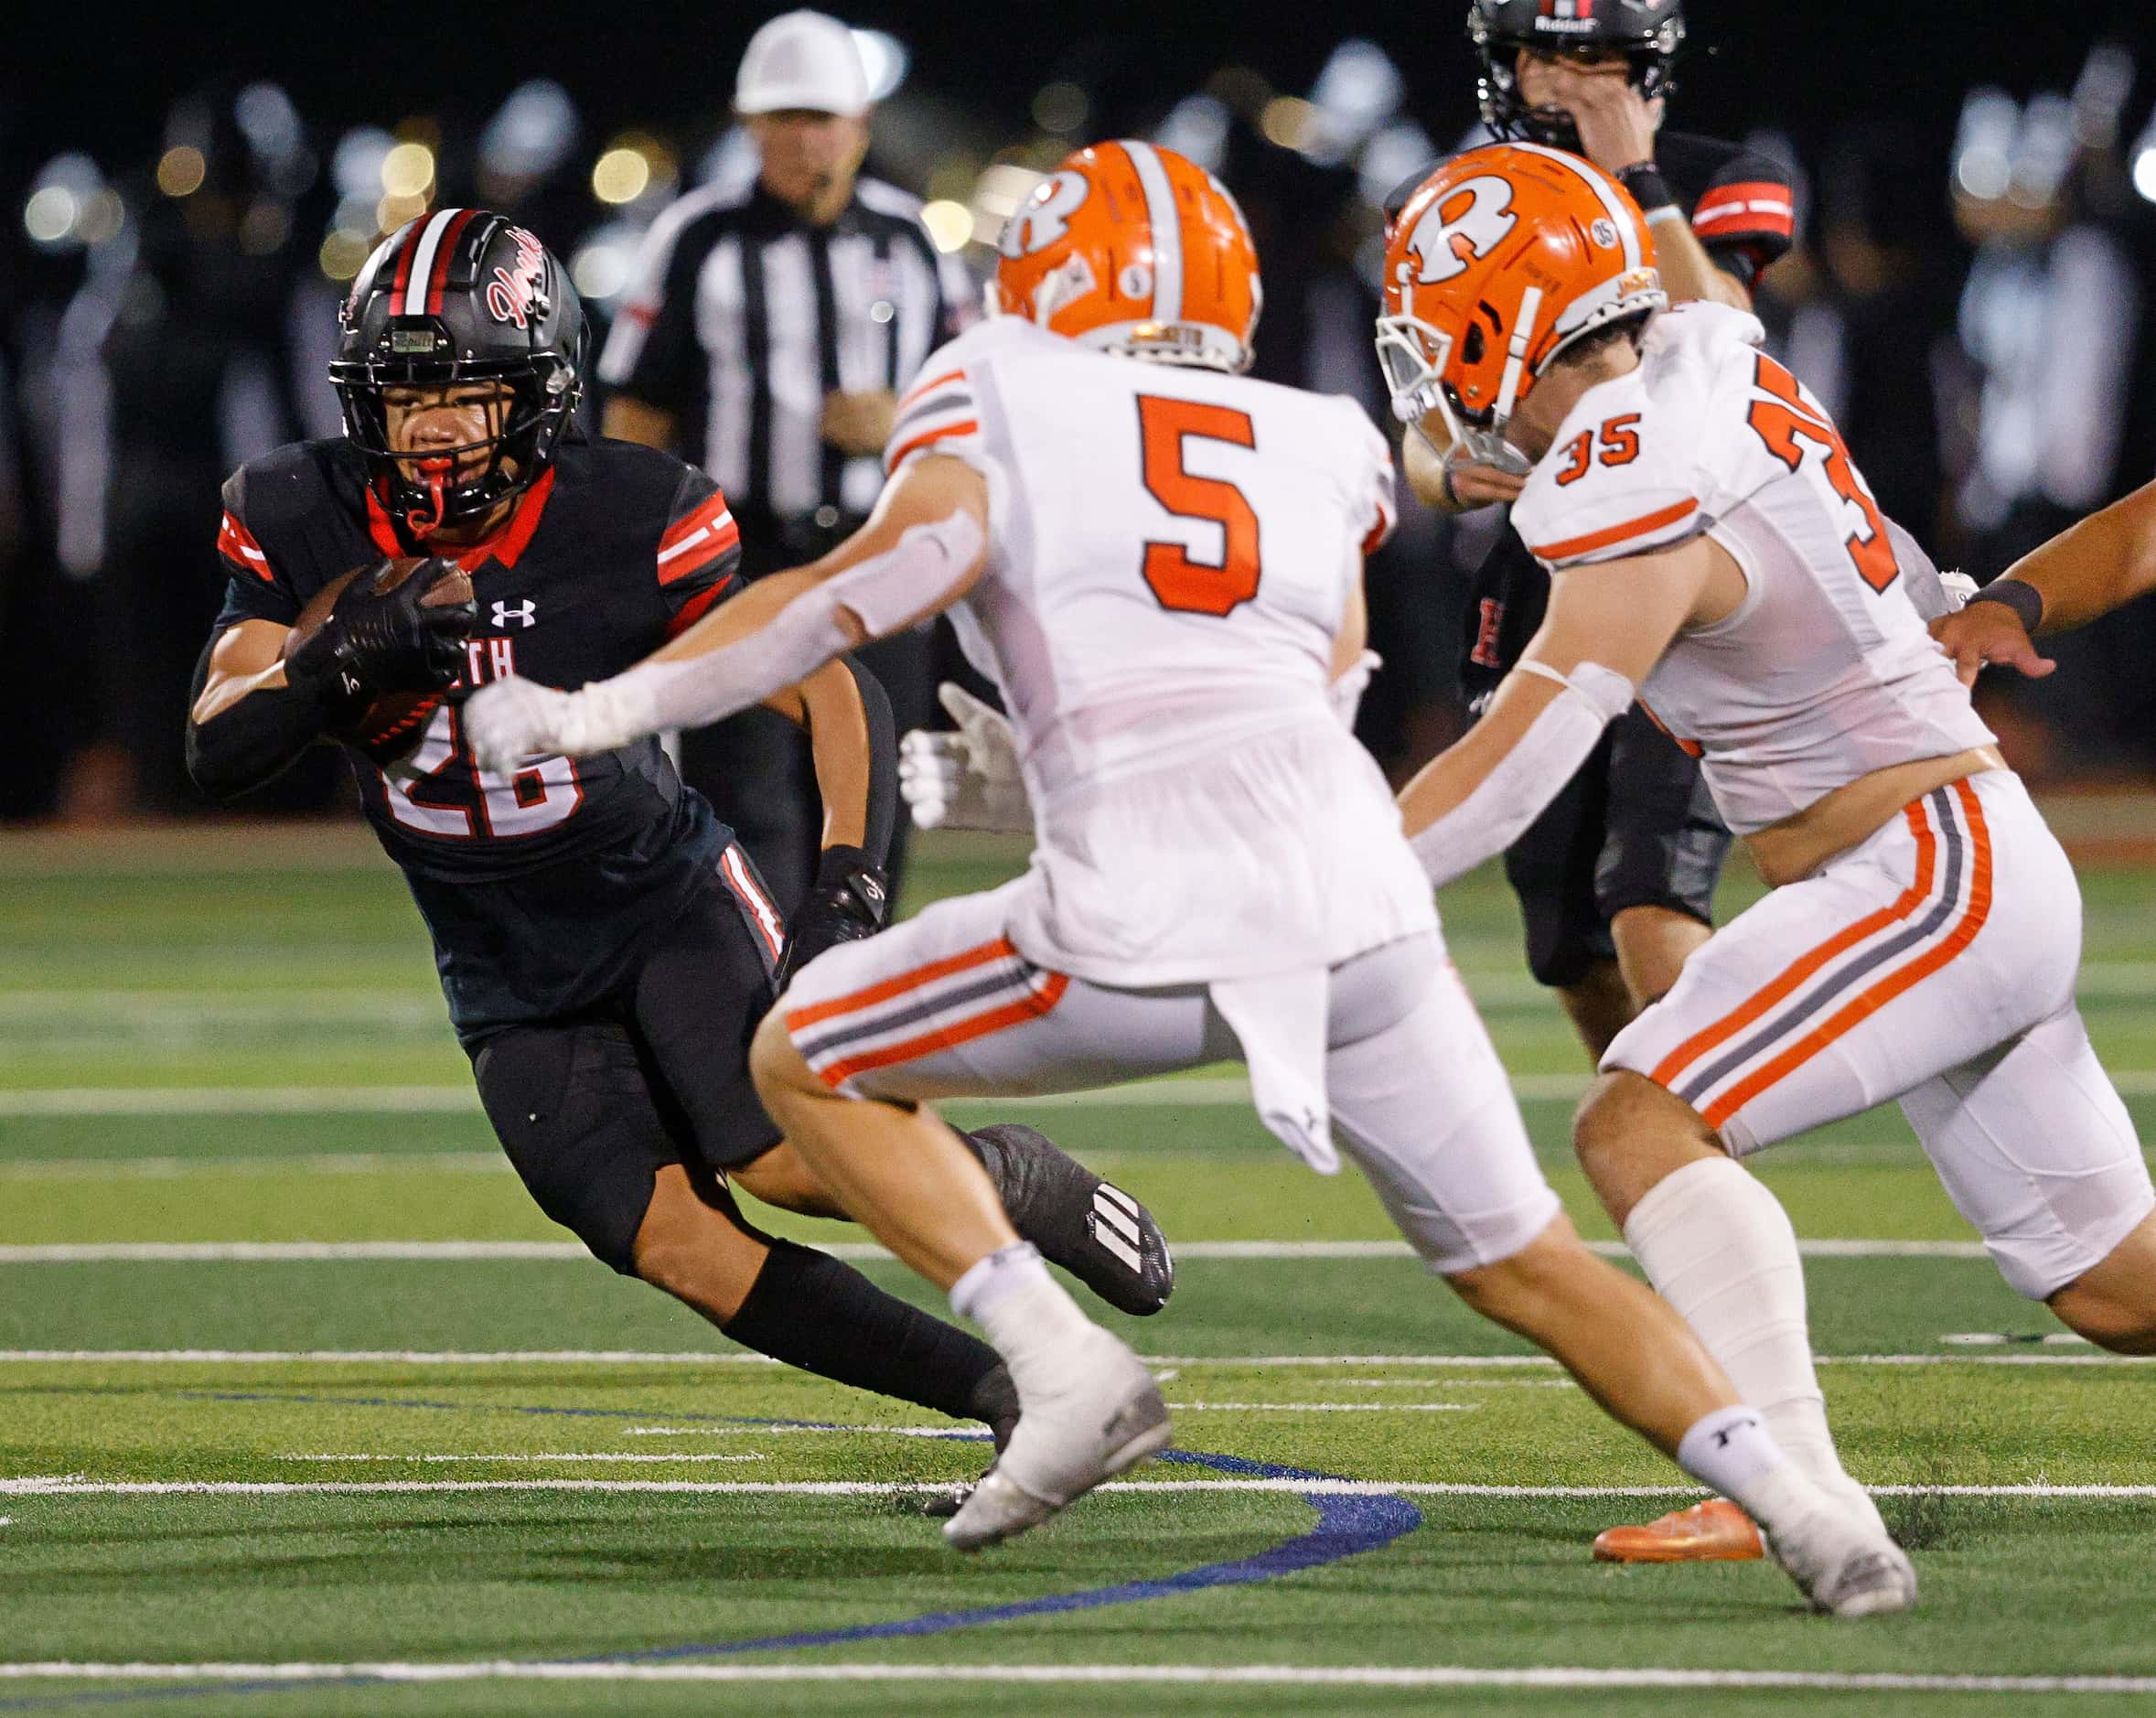 Rockwall-Heath's Hayden Gentry (26) keeps a ball away from Rockwall's Tanner Hart (5) and...